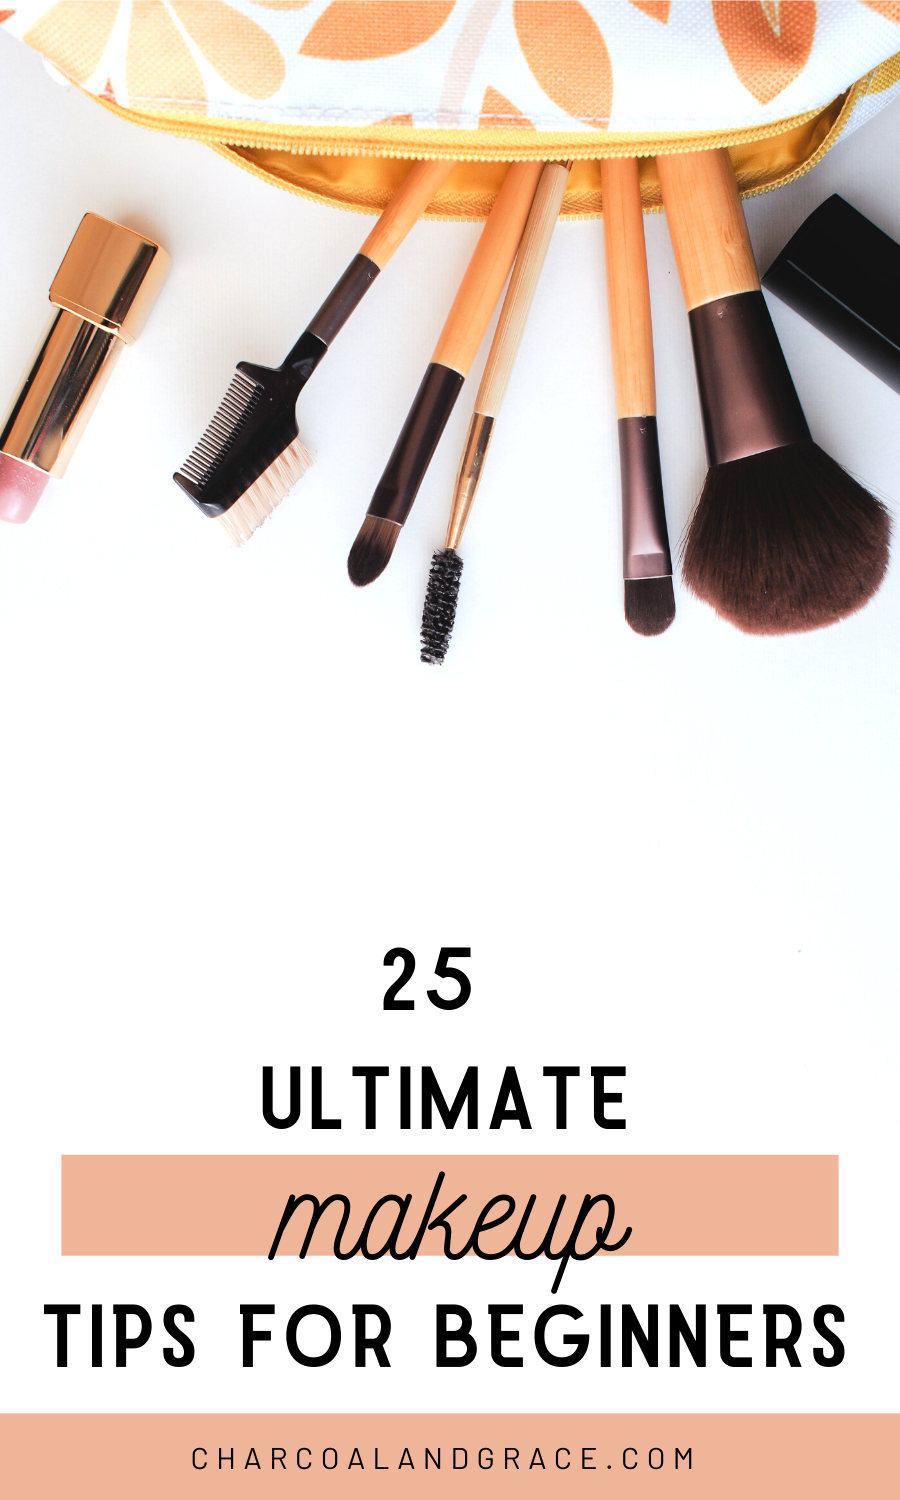 25 Easy Makeup Tips for Beginners -   18 makeup Simple how to apply ideas